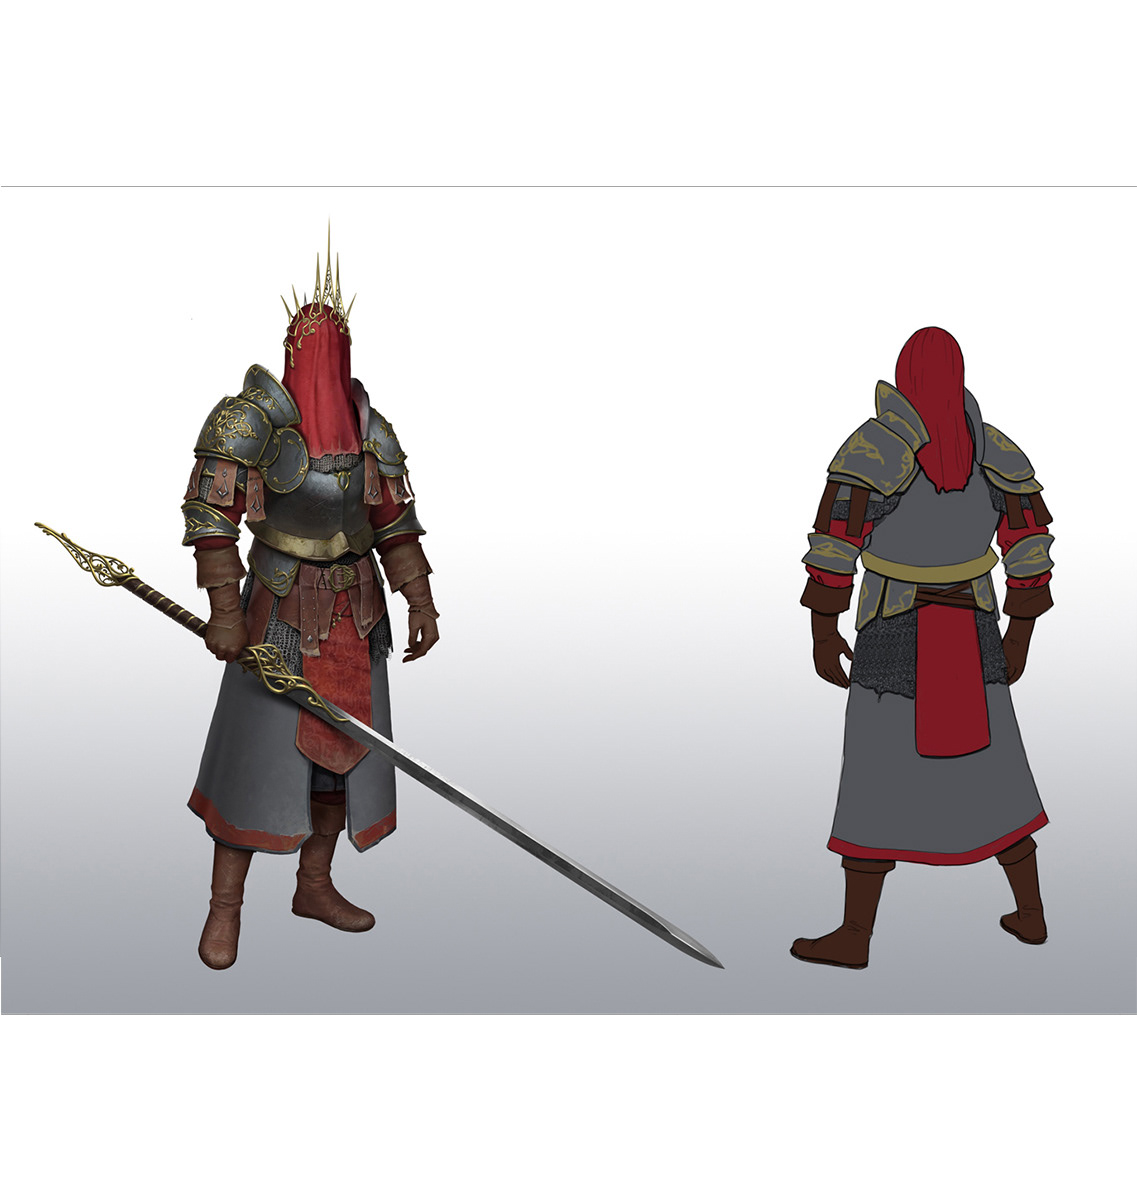 concept art conceptartist characterartist Character knight medieval warrior fantasy